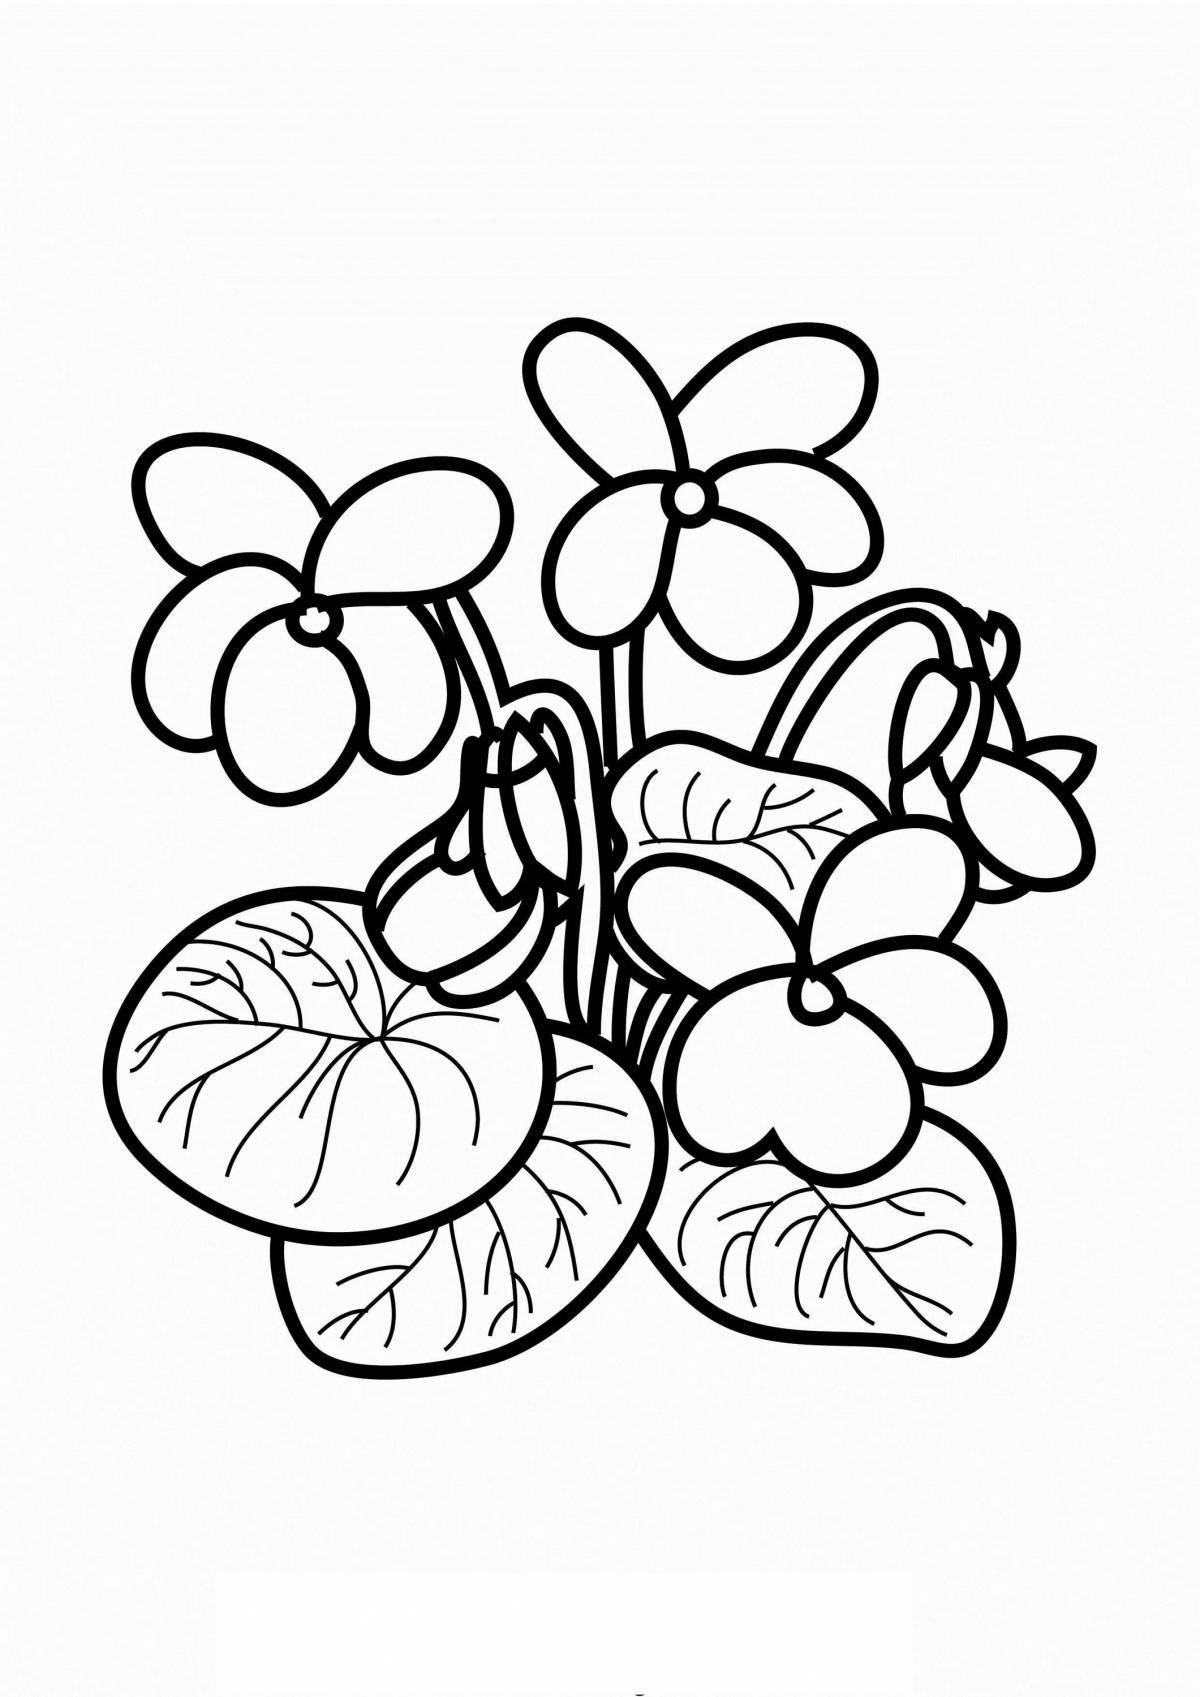 Coloring page lovely purple houseplants